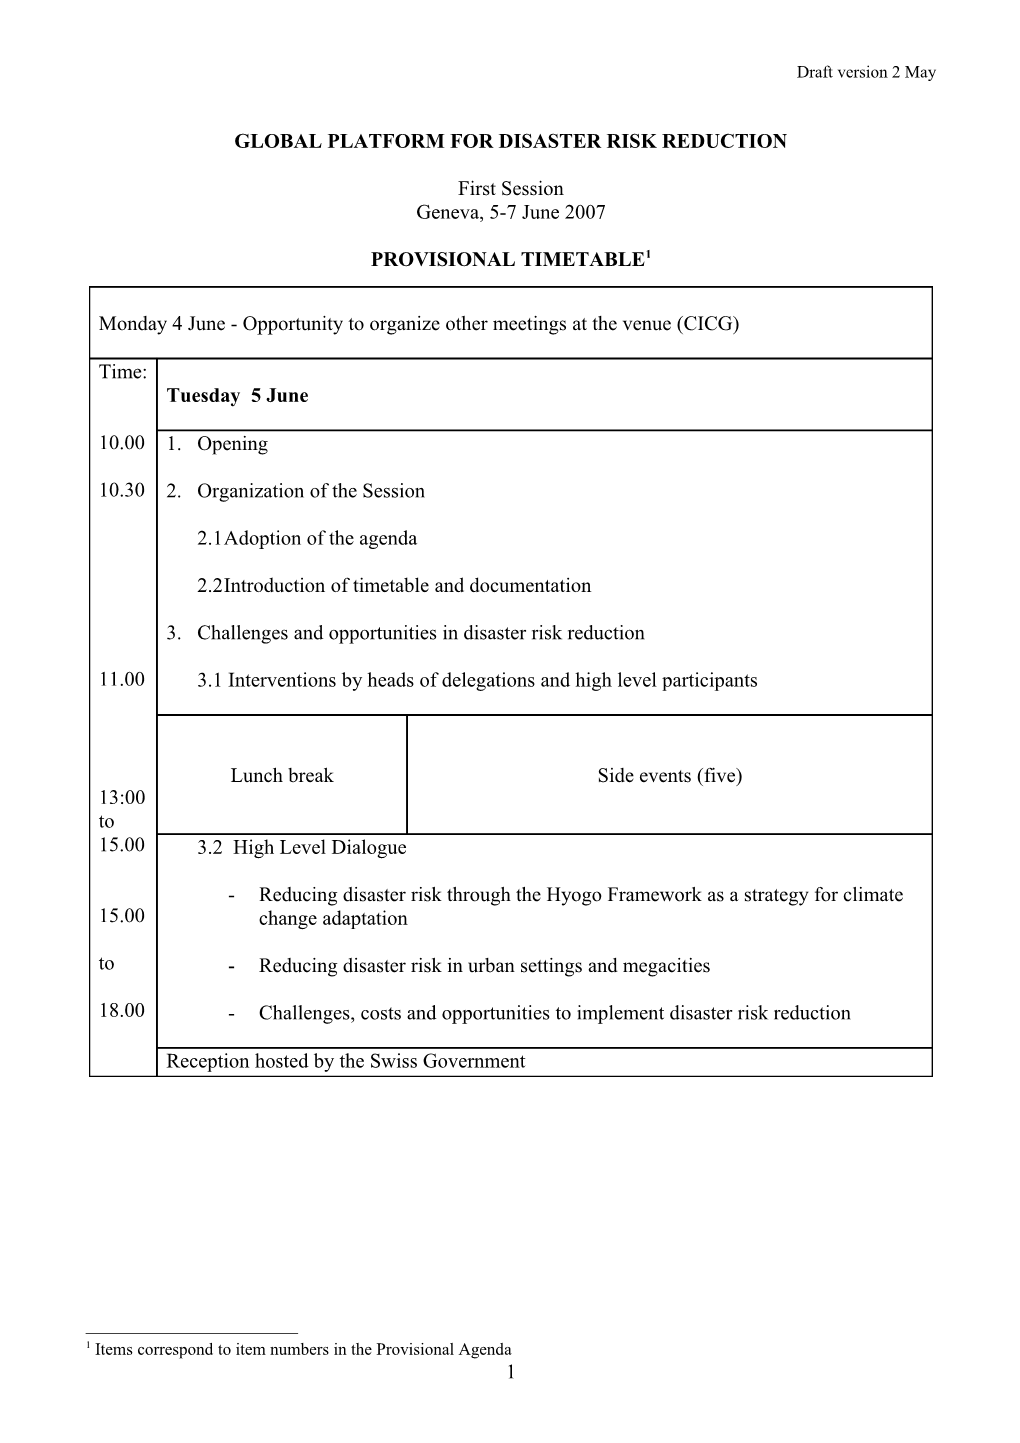 Monday 4 June - Preparatory Day for Mainly Procedural Discussions